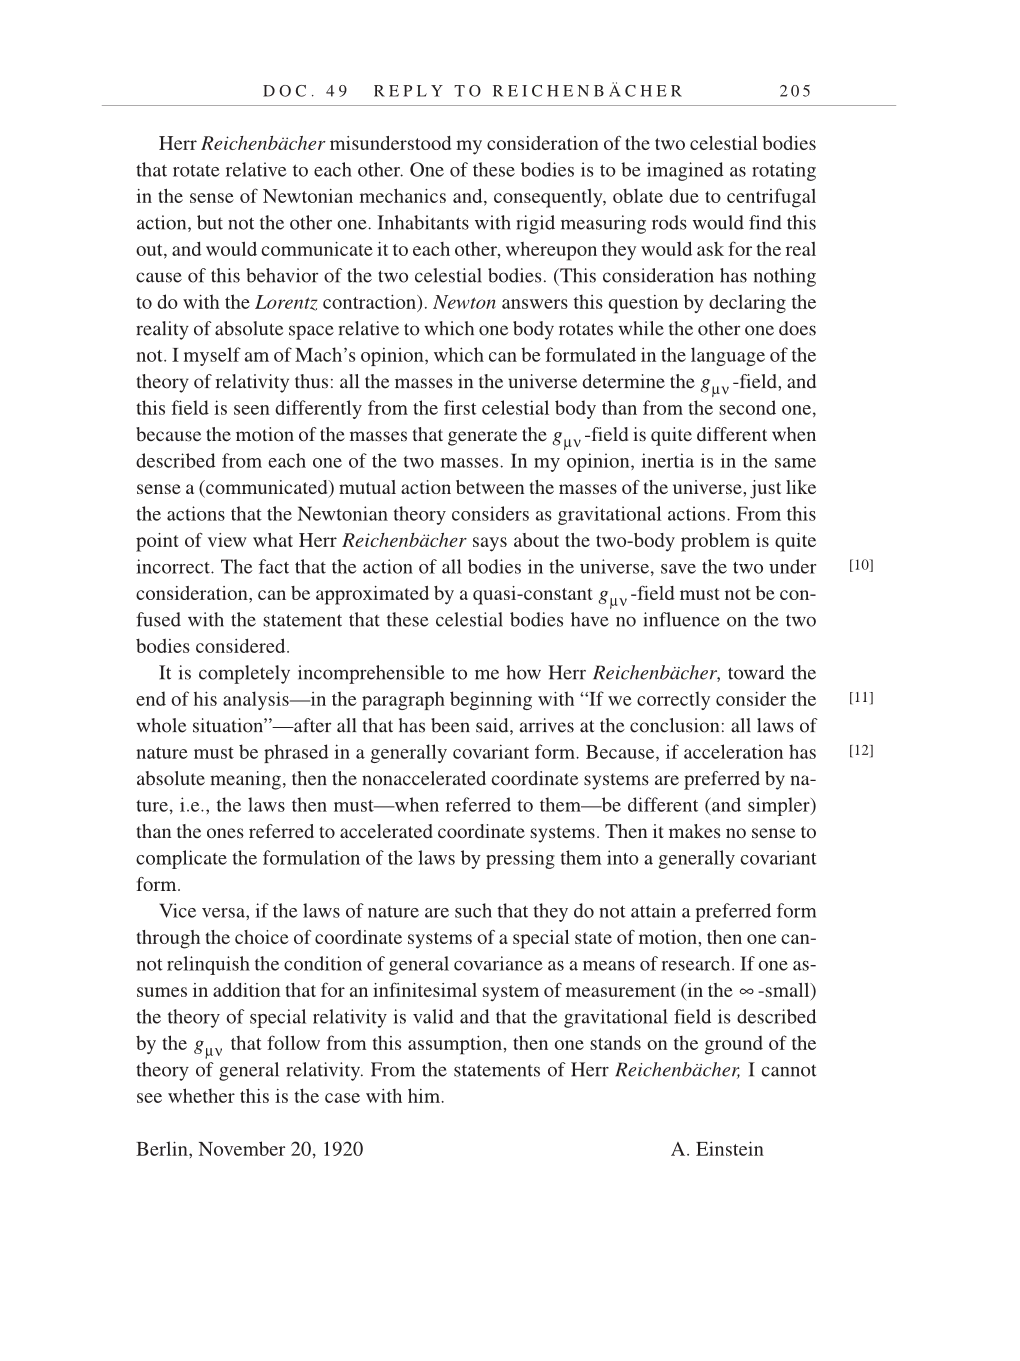 Volume 7: The Berlin Years: Writings, 1918-1921 (English translation supplement) page 205